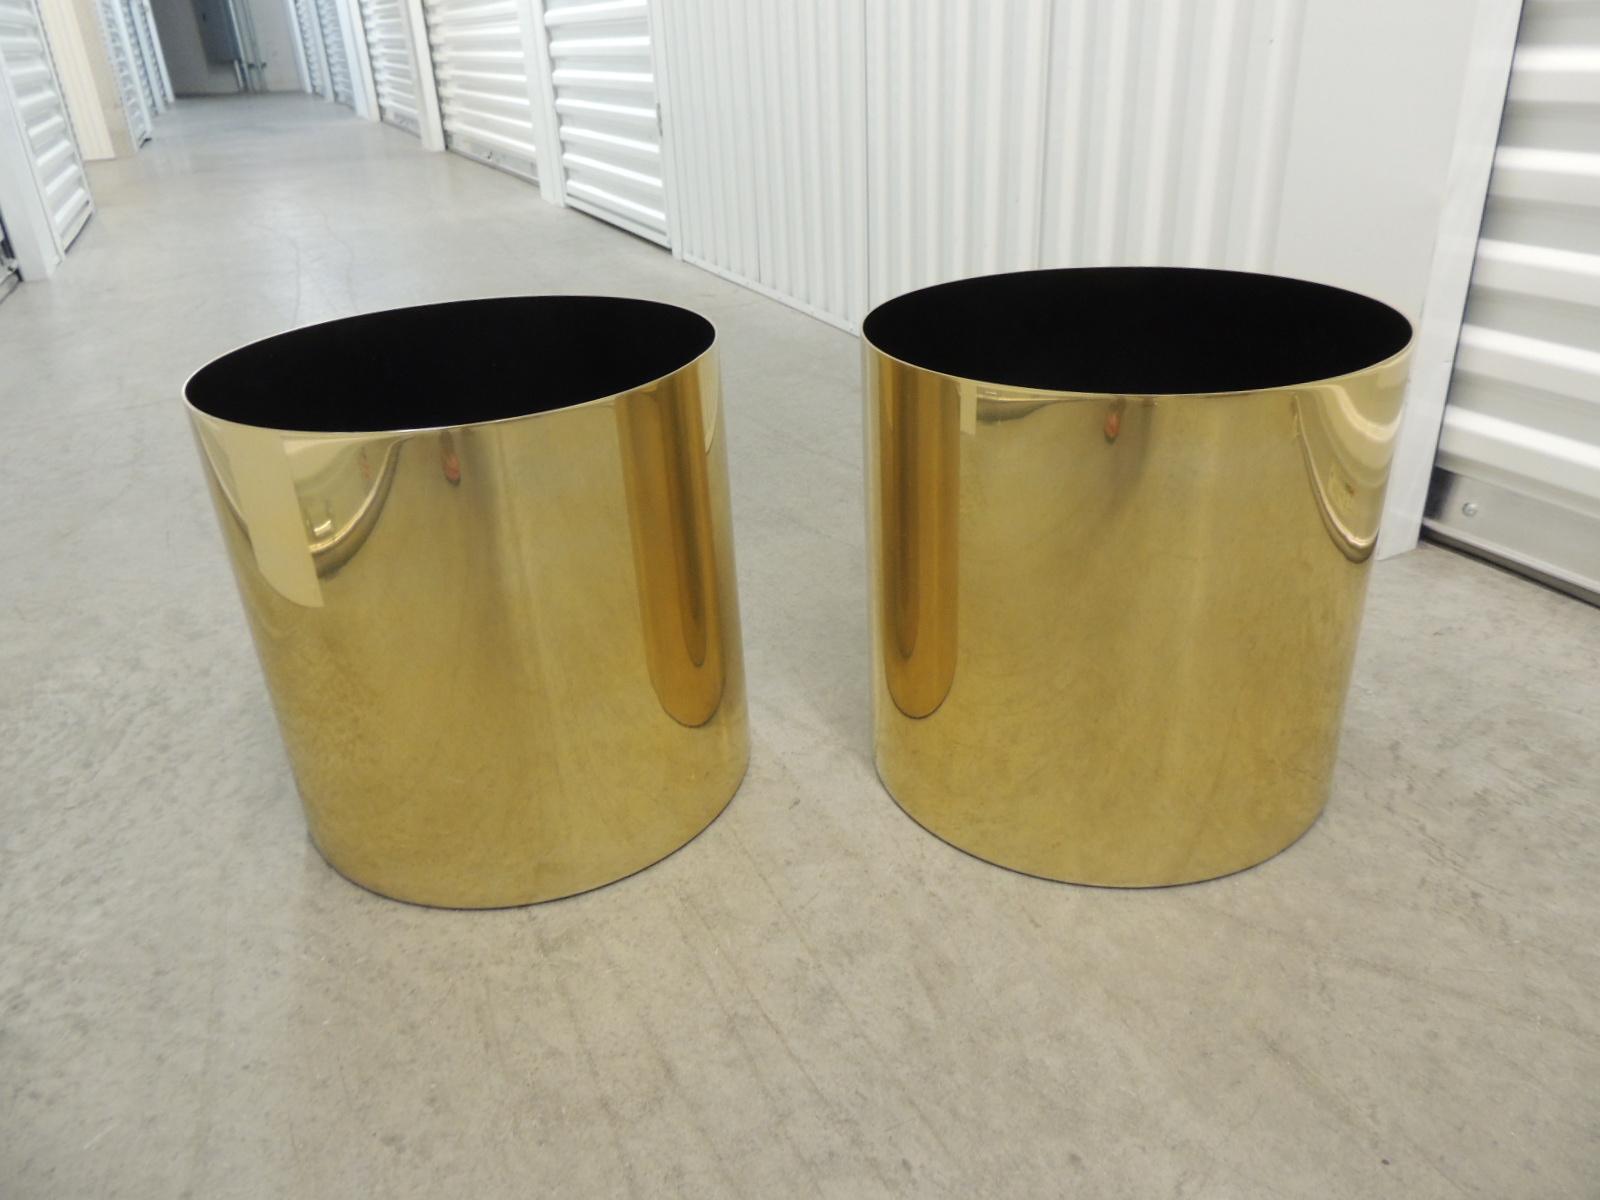 Large Mid-Century Modern polished gold color round planter.
Size: 14